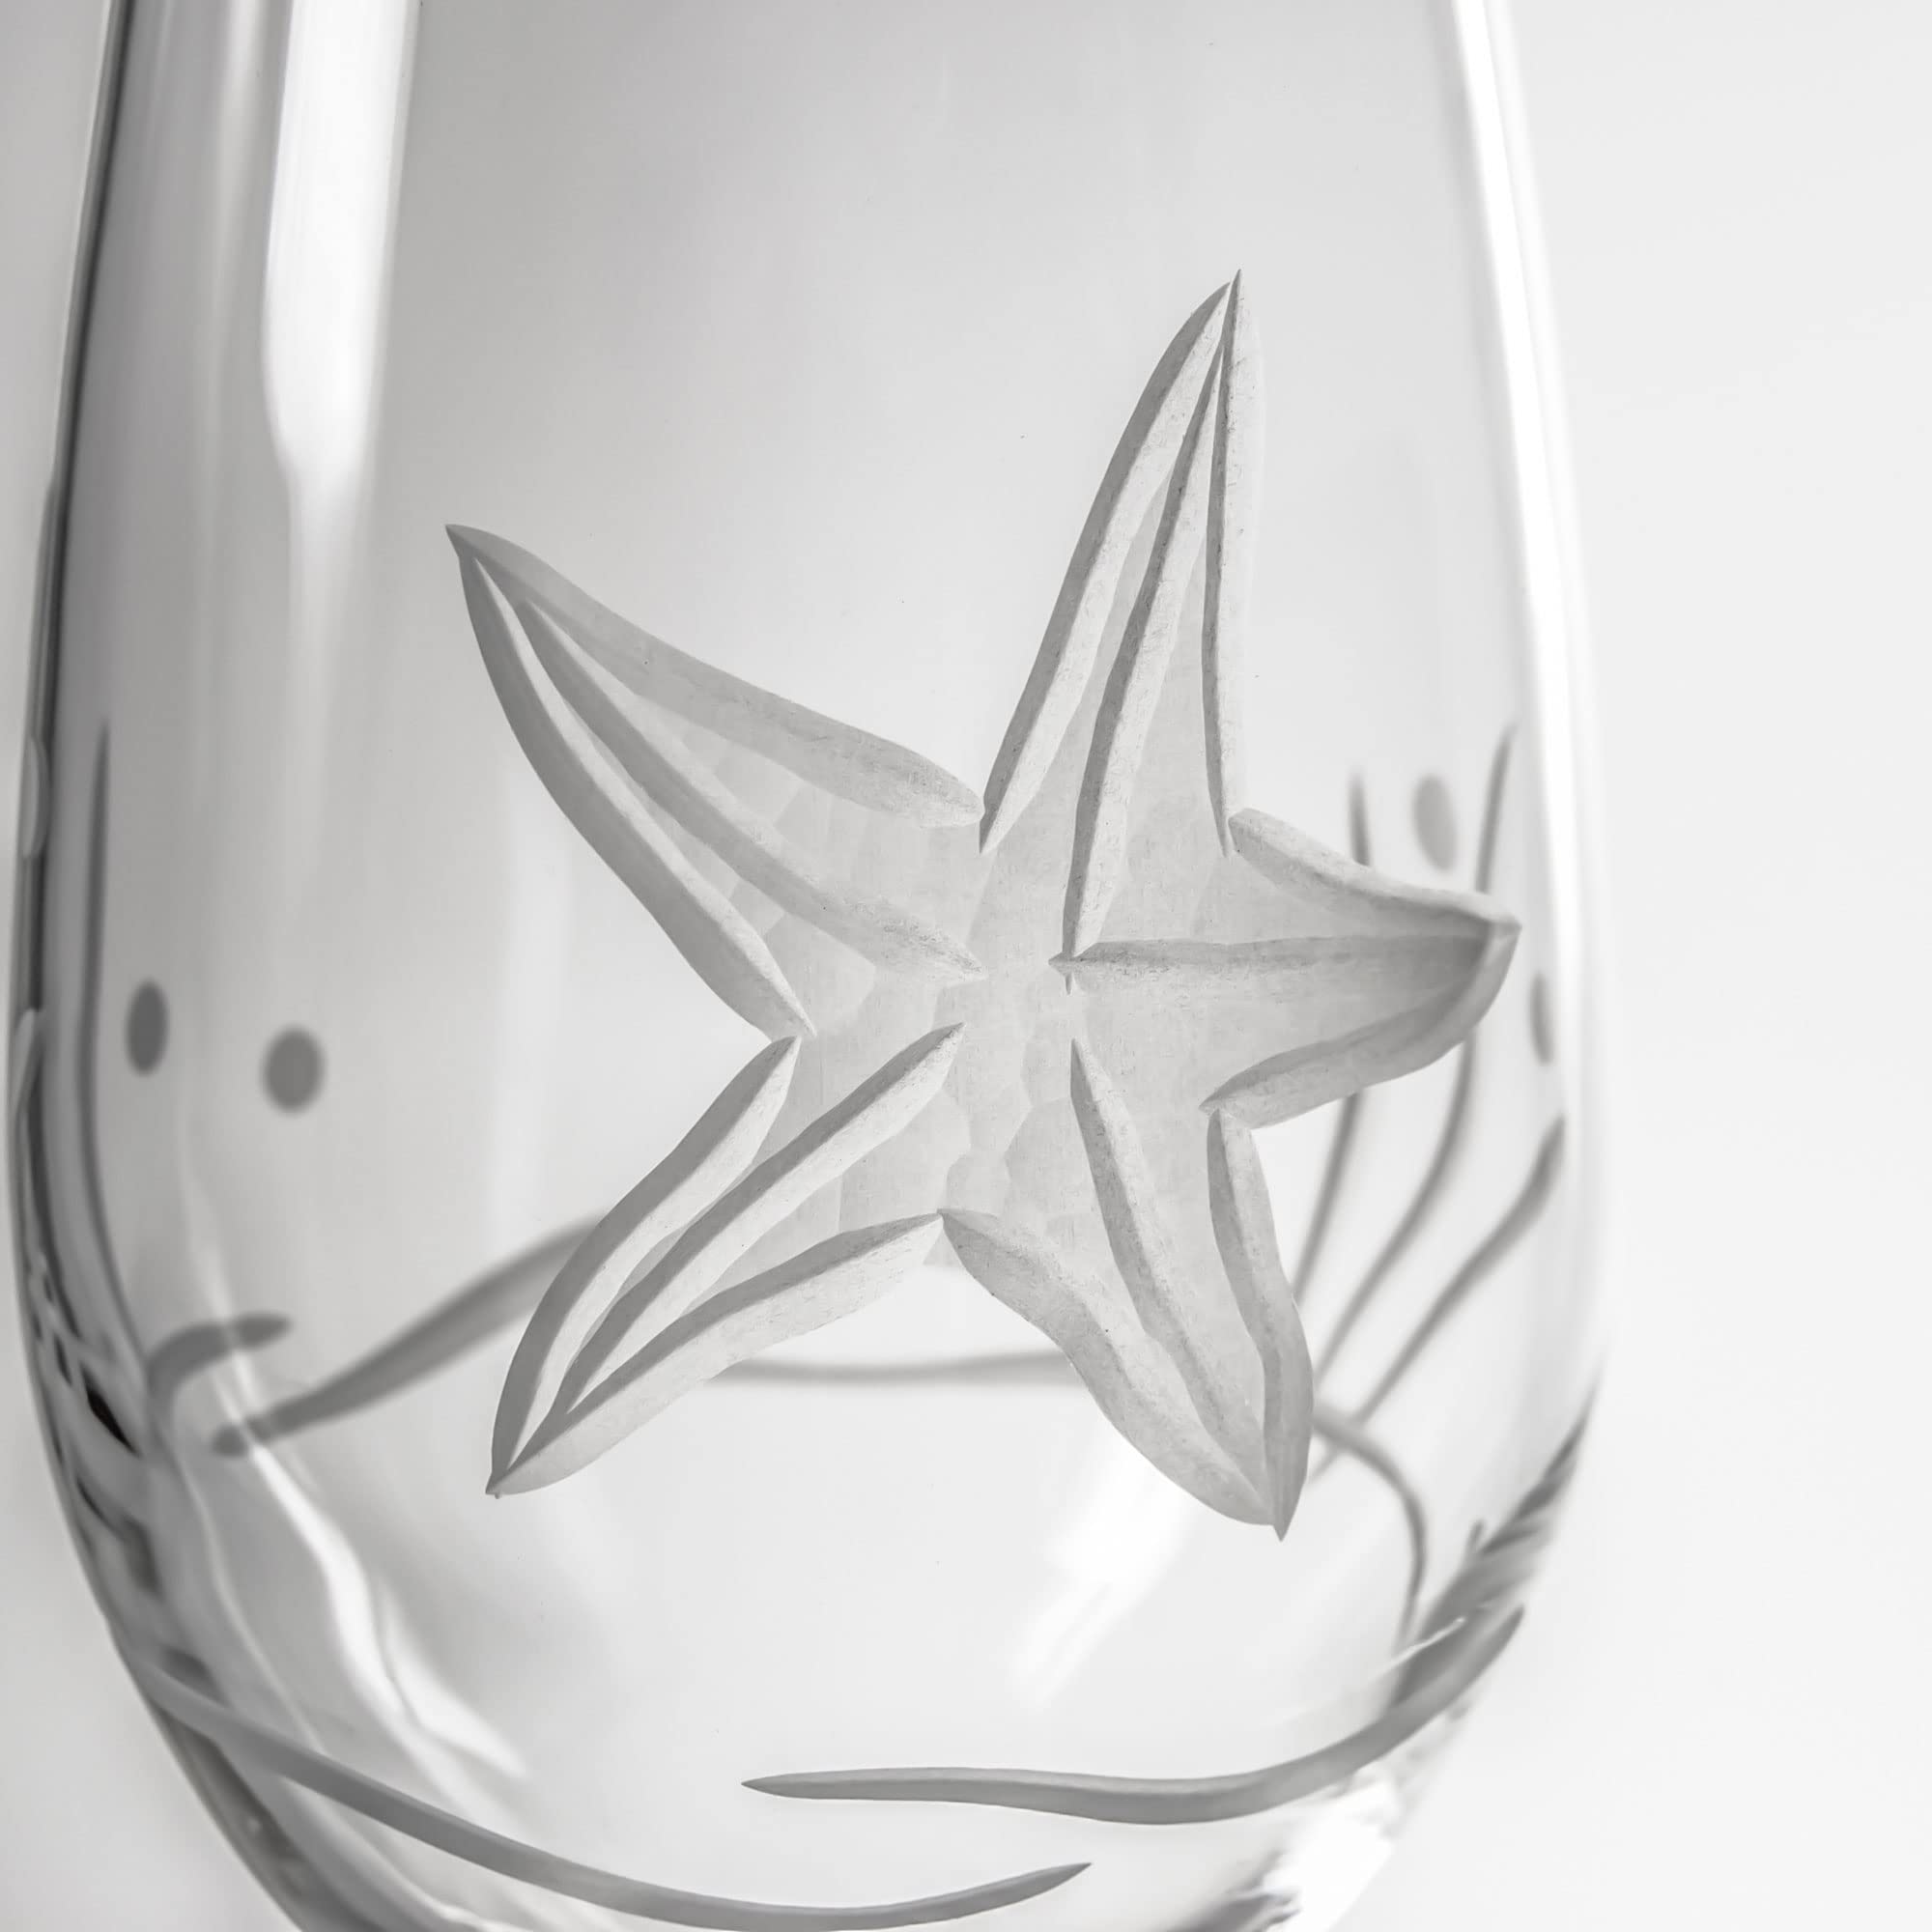 Rolf Glass Starfish All Purpose Wine Glass 18 Ounce | Set of 4 Large Wine Glasses | Lead-Free Glass | Engraved Large Wine Glasses | Made in the USA